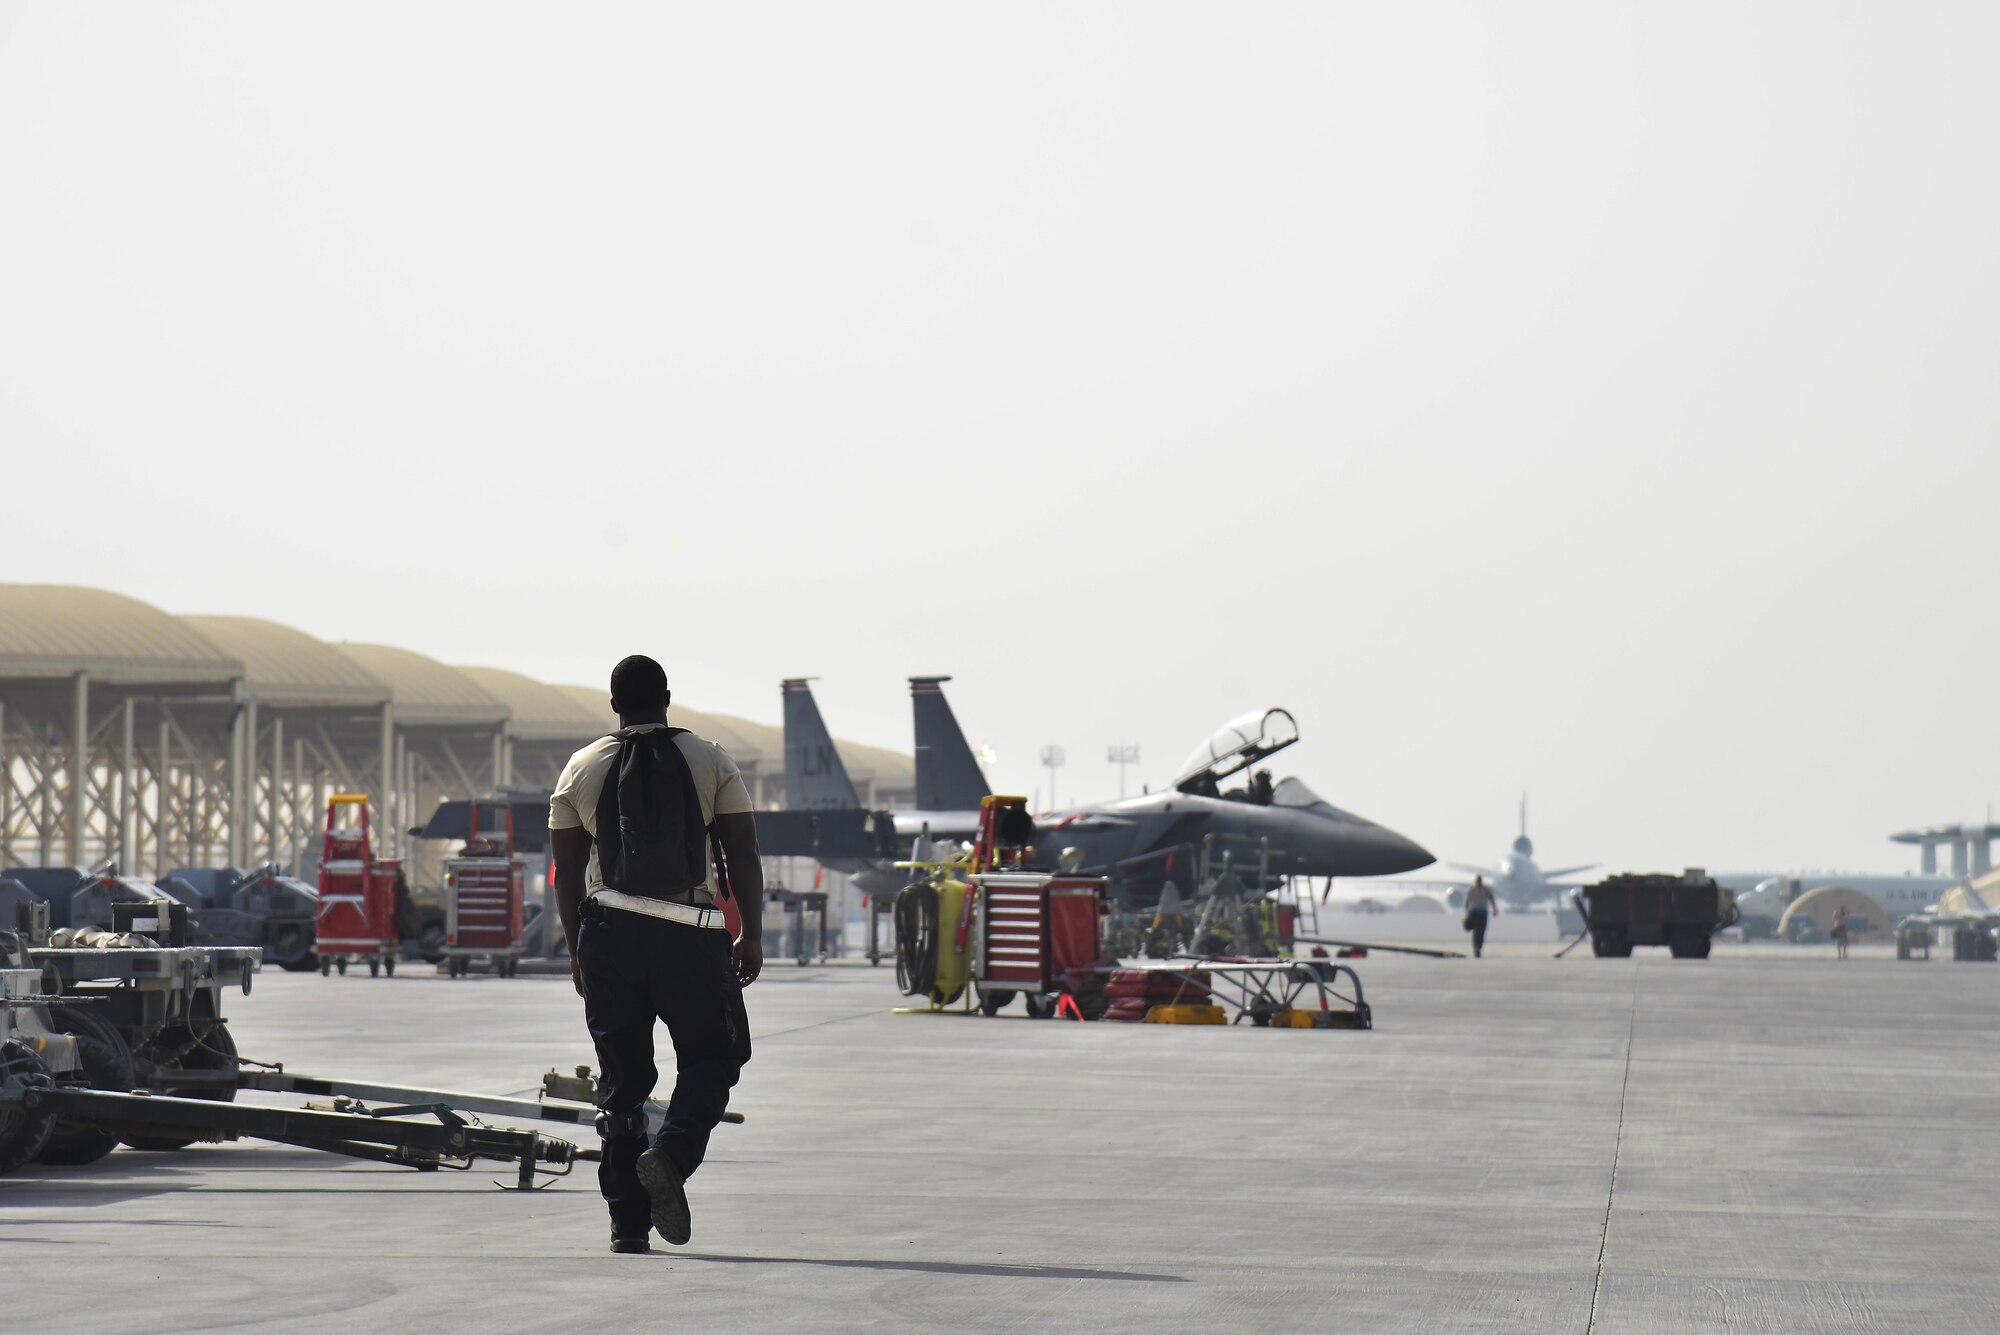 Staff Sgt. Oren walks the flightline during his shift at an undisclosed location in Southwest Asia June 2, 2015. Sgt. Oren is a dedicated crew chief assigned to the 380th Expeditionary Aircraft Maintenance Squadron. (U.S. Air Force photo/Tech. Sgt. Christopher Boitz) 